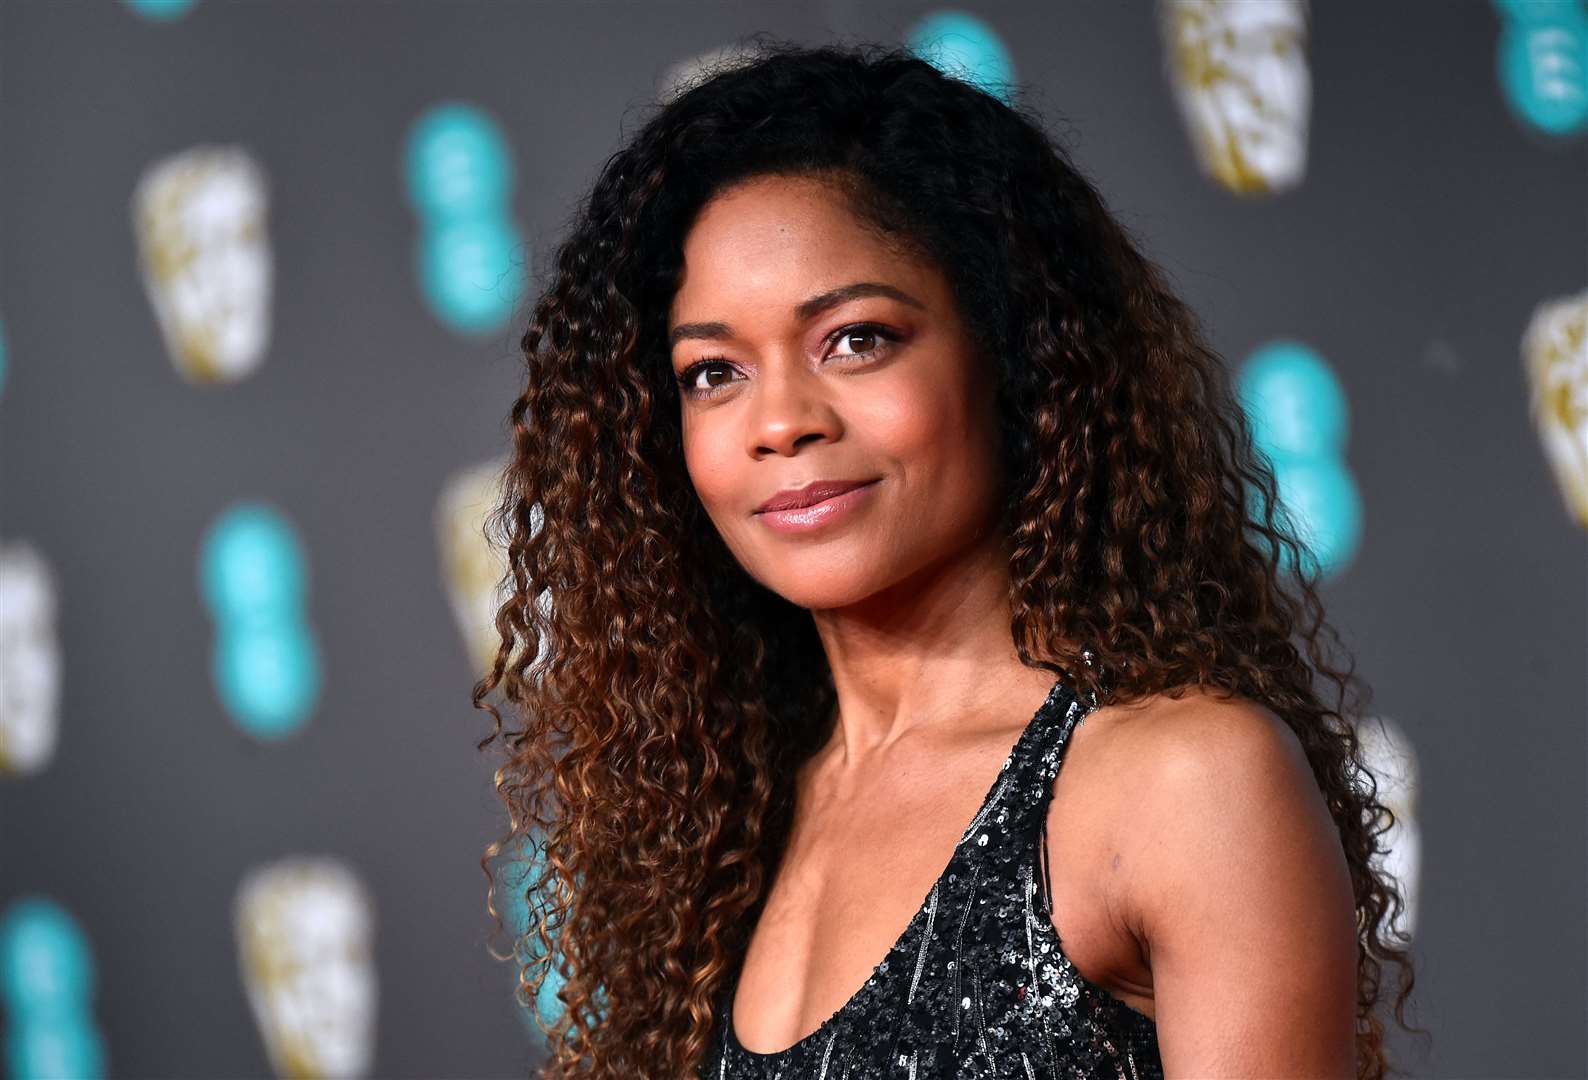 Naomie Harris attending the 73rd British Academy Film Awards held at the Royal Albert Hall. Picture: PA Wire